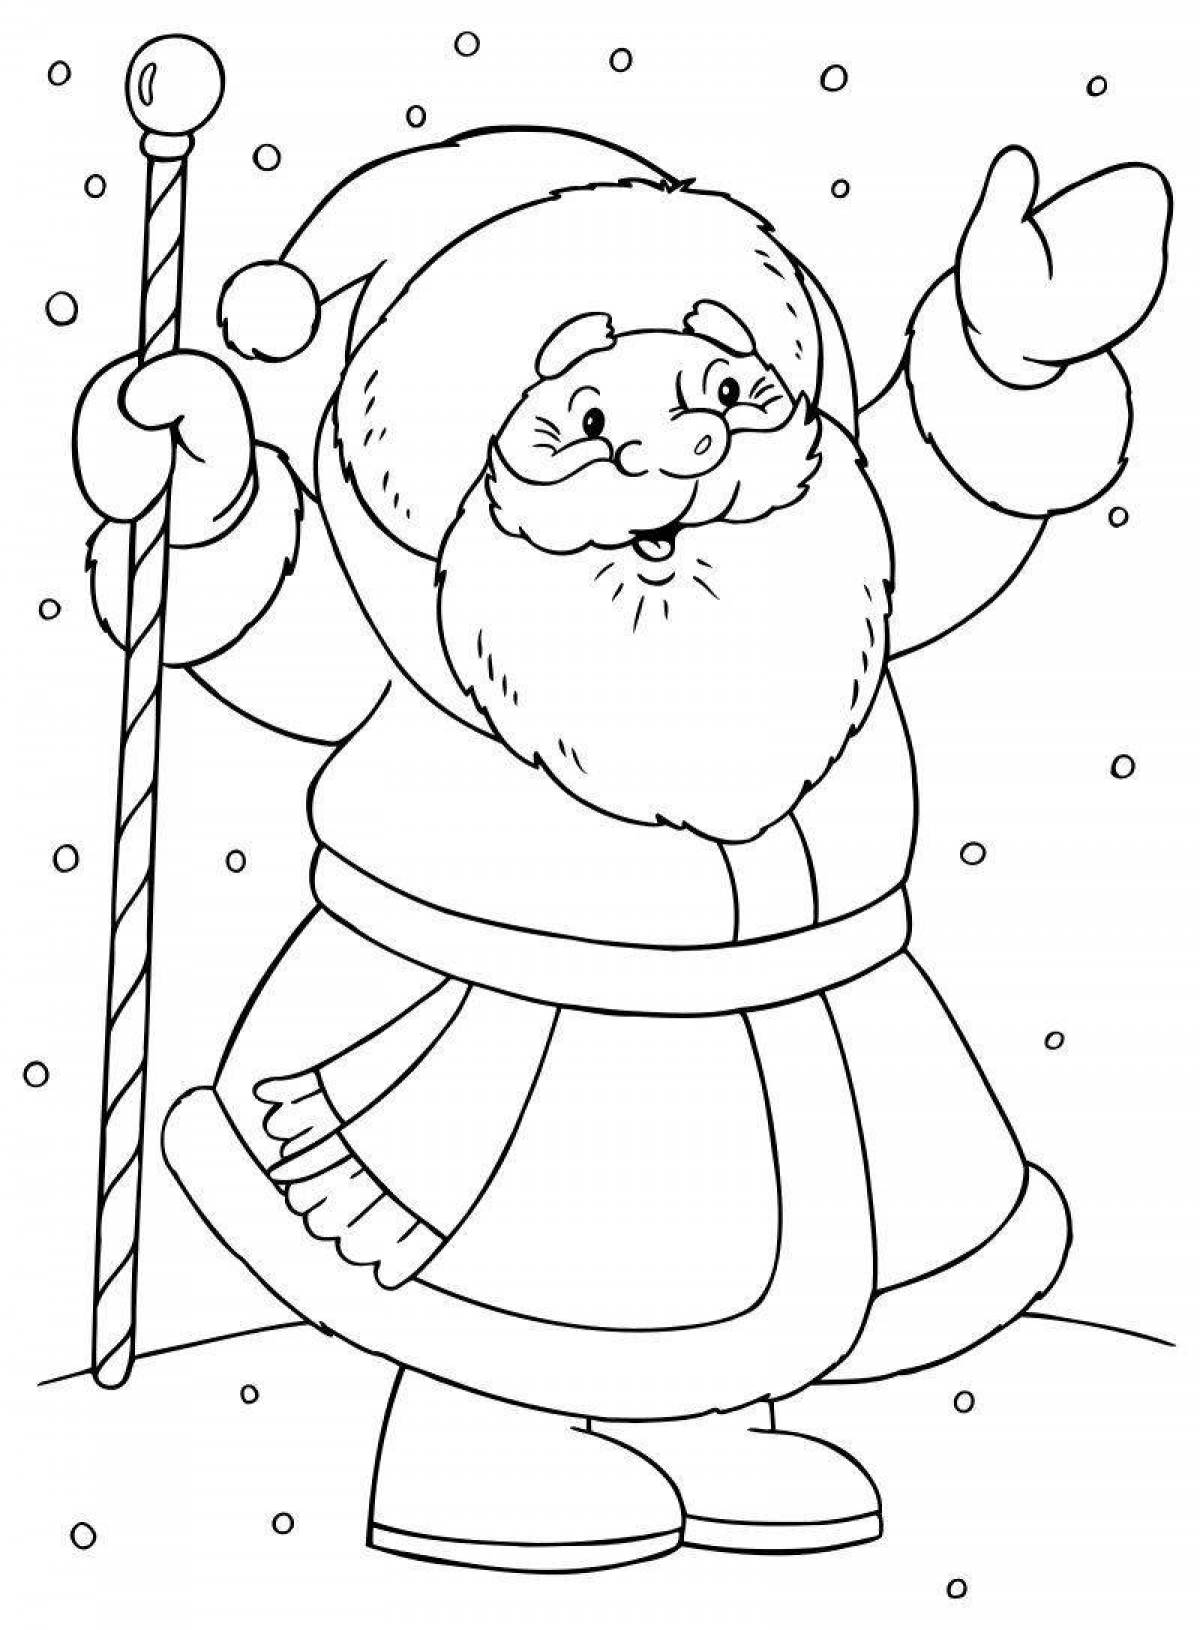 Santa claus bright coloring book for kids 2-3 years old